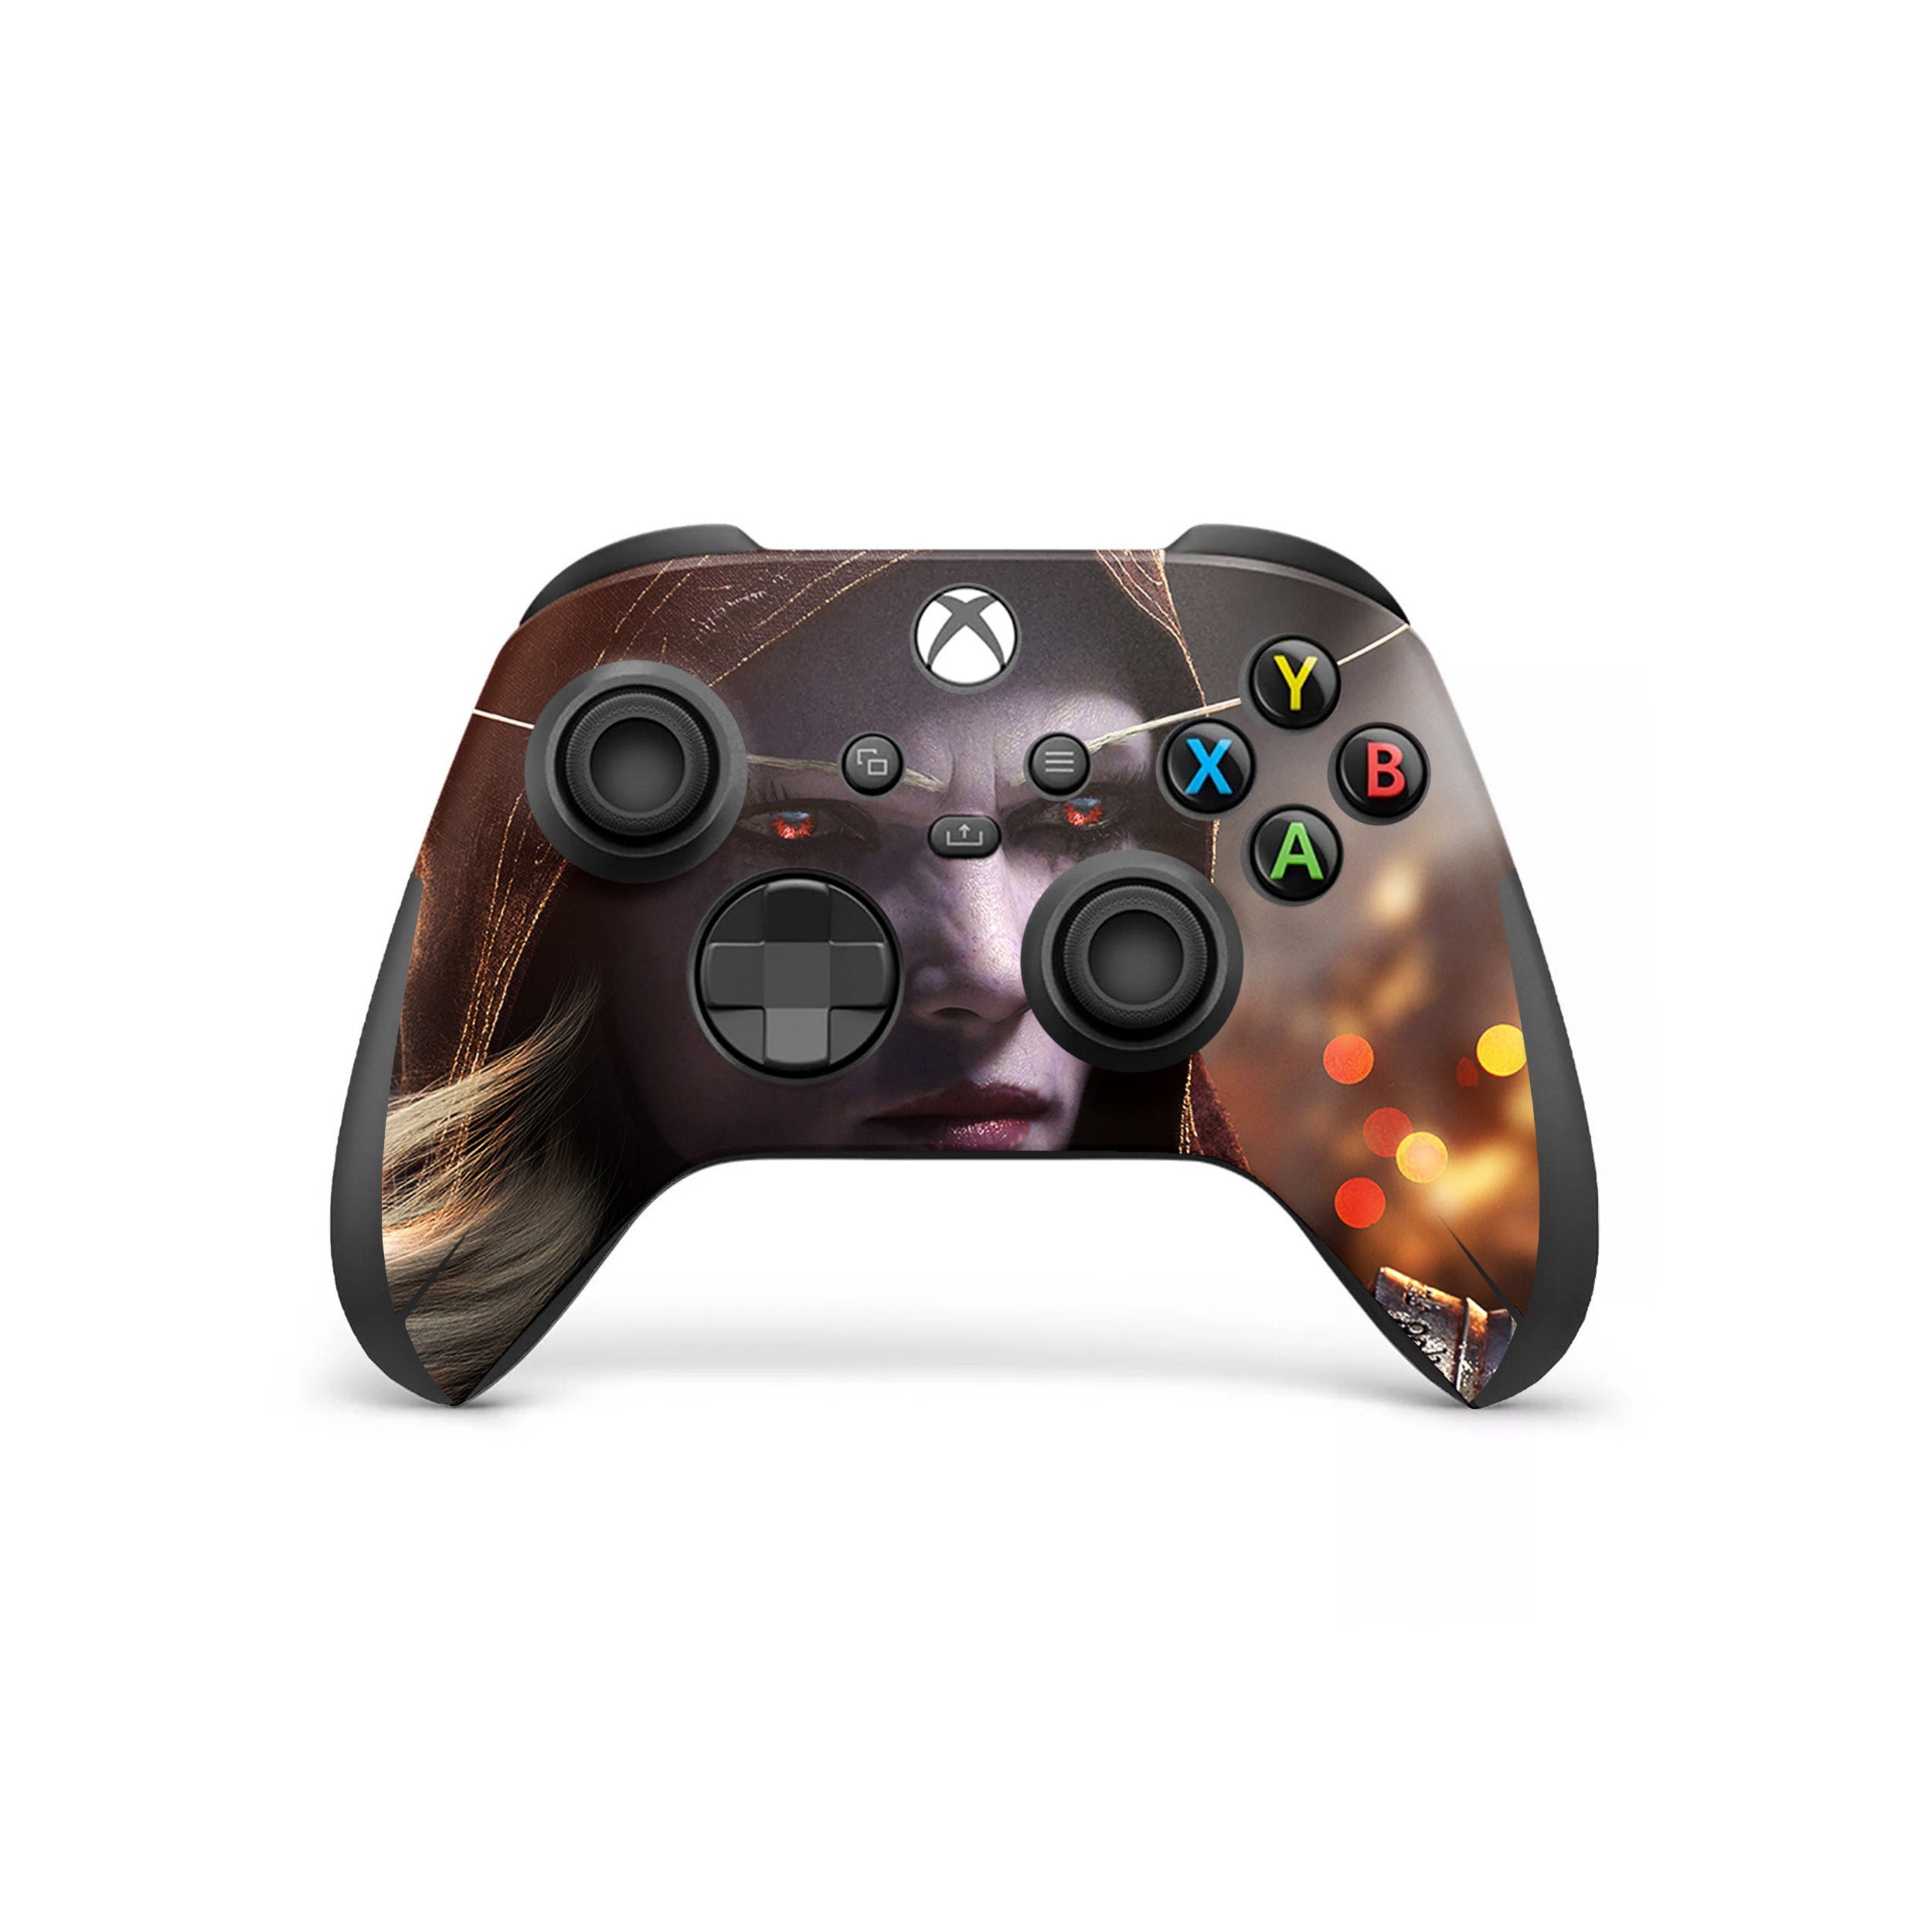 A video game skin featuring a World of Warcraft design for the Xbox Wireless Controller.